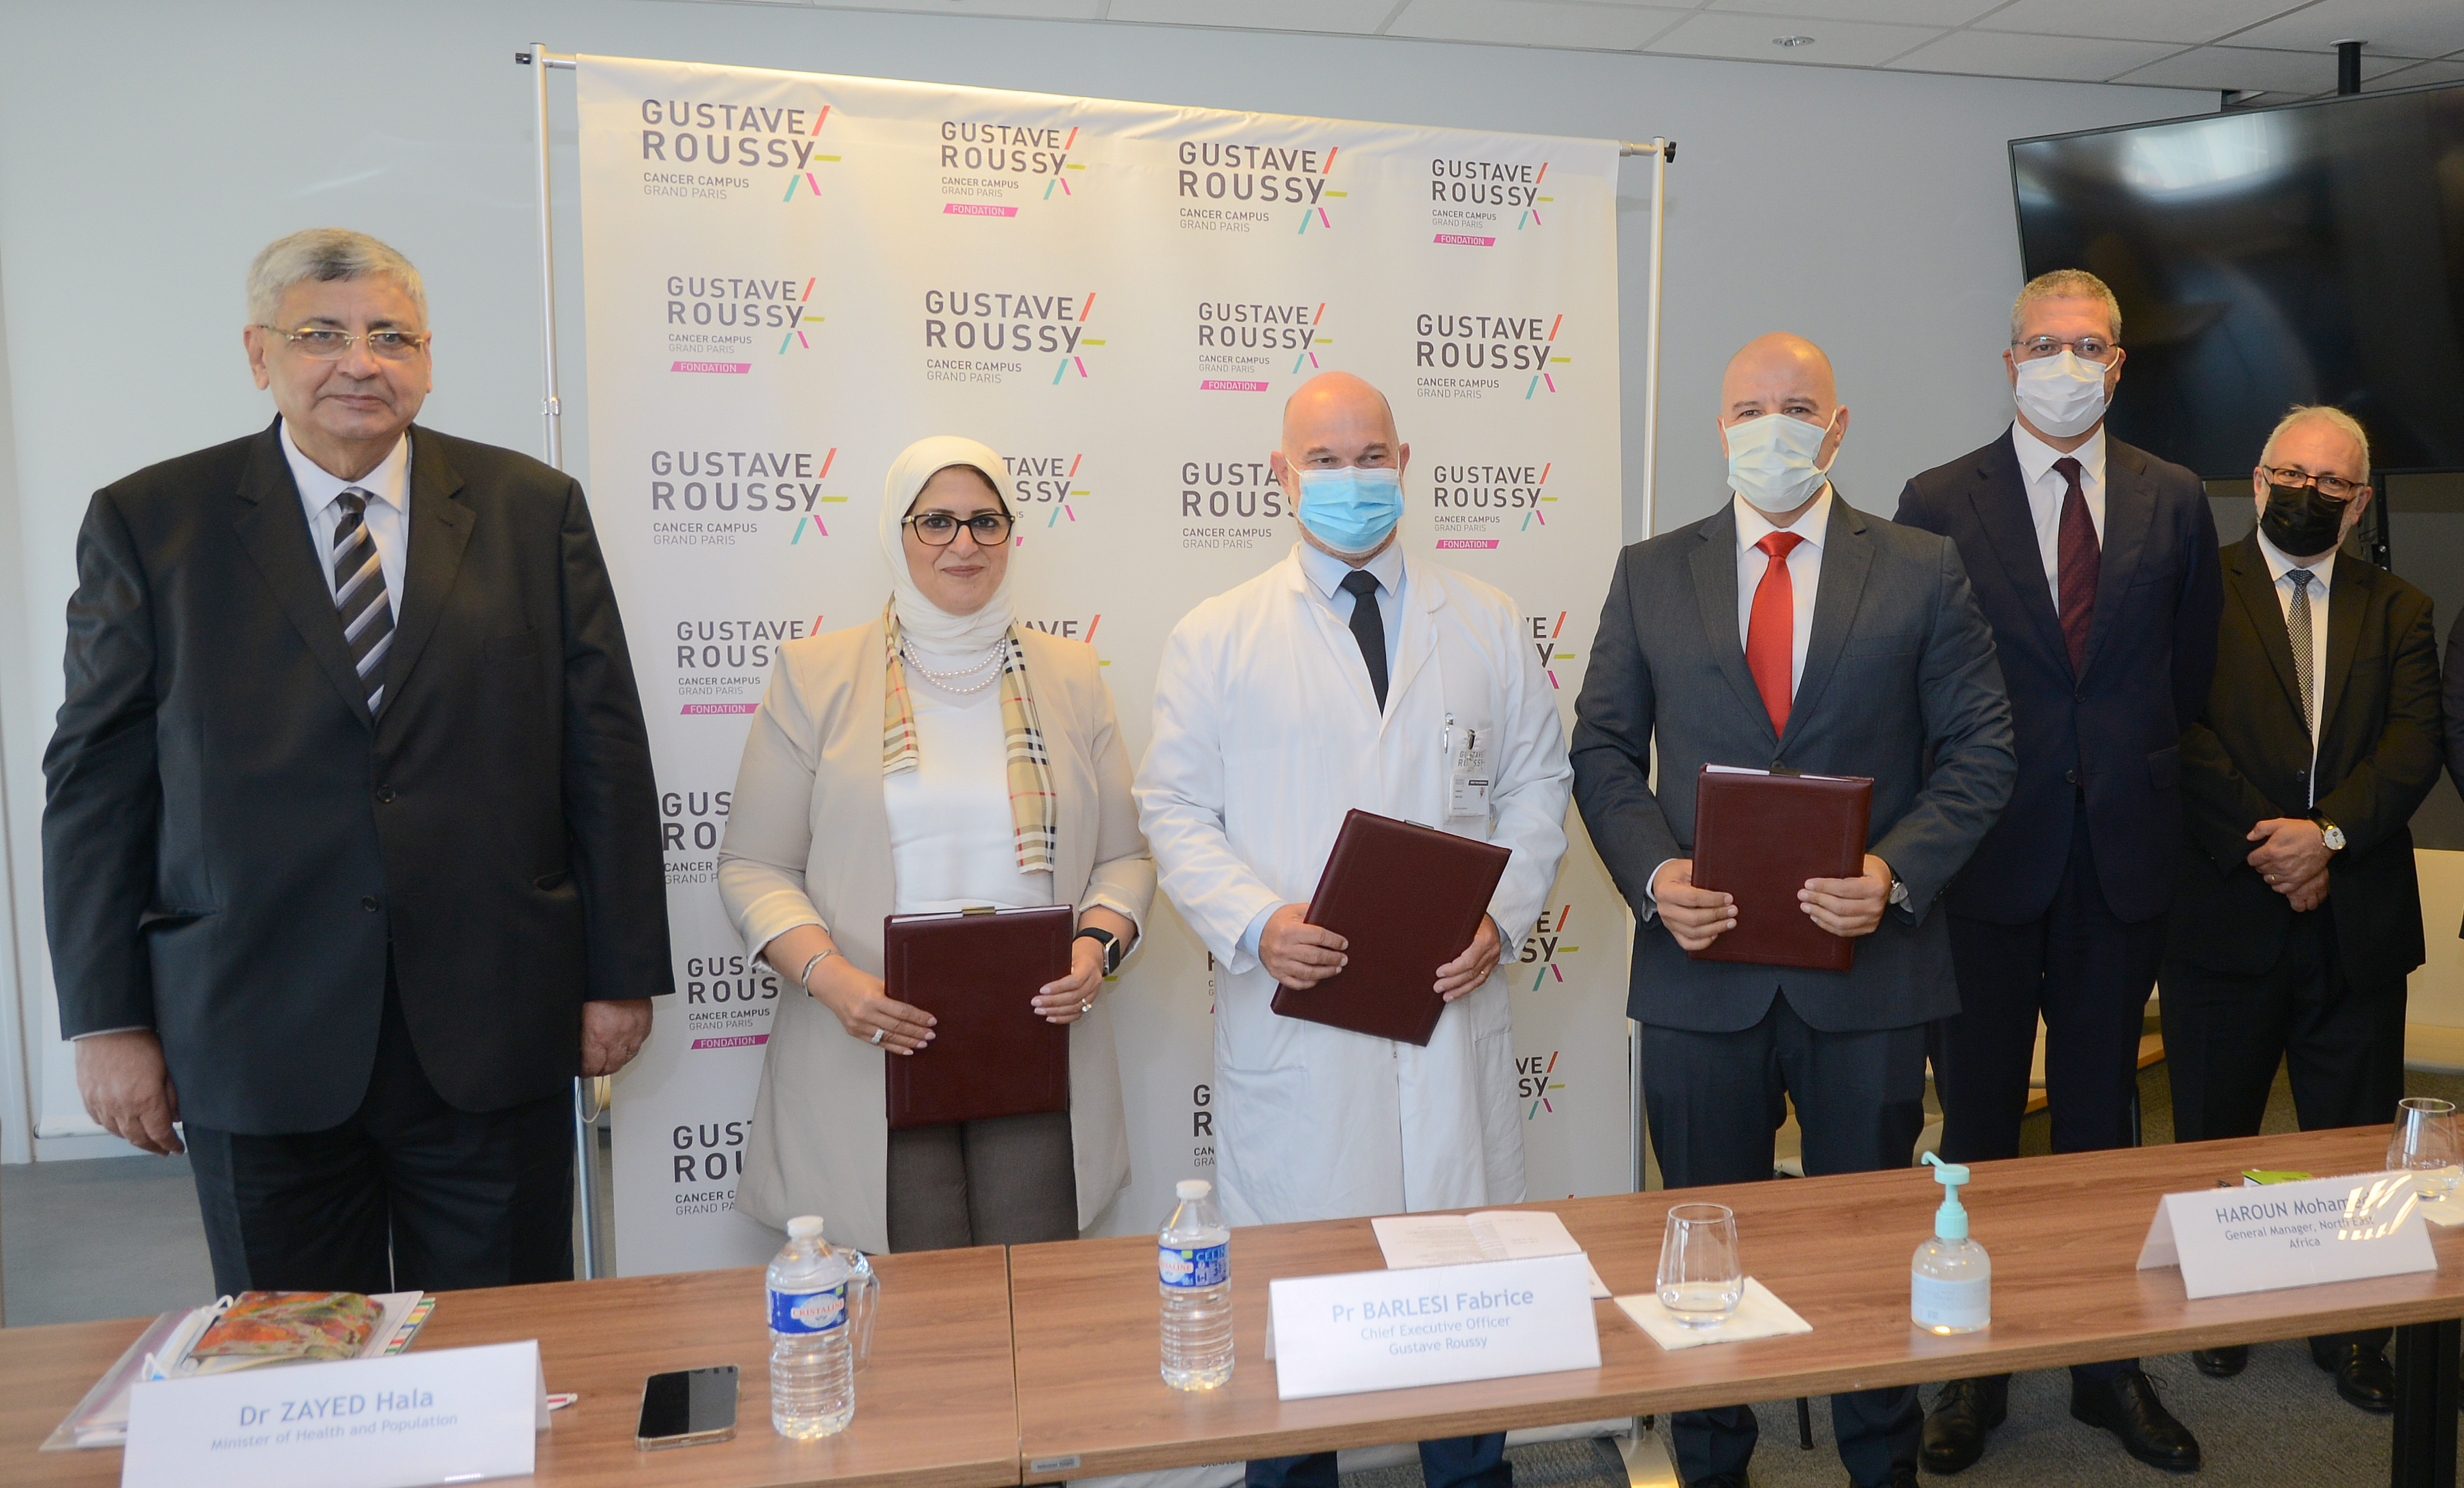 Egyptian Ministry of Health just signed a preliminary agreement with GE Healthcare and Europe’s top cancer hospital, Gustave Roussy, to create rapid diagnosis clinics for breast cancer in Egypt.